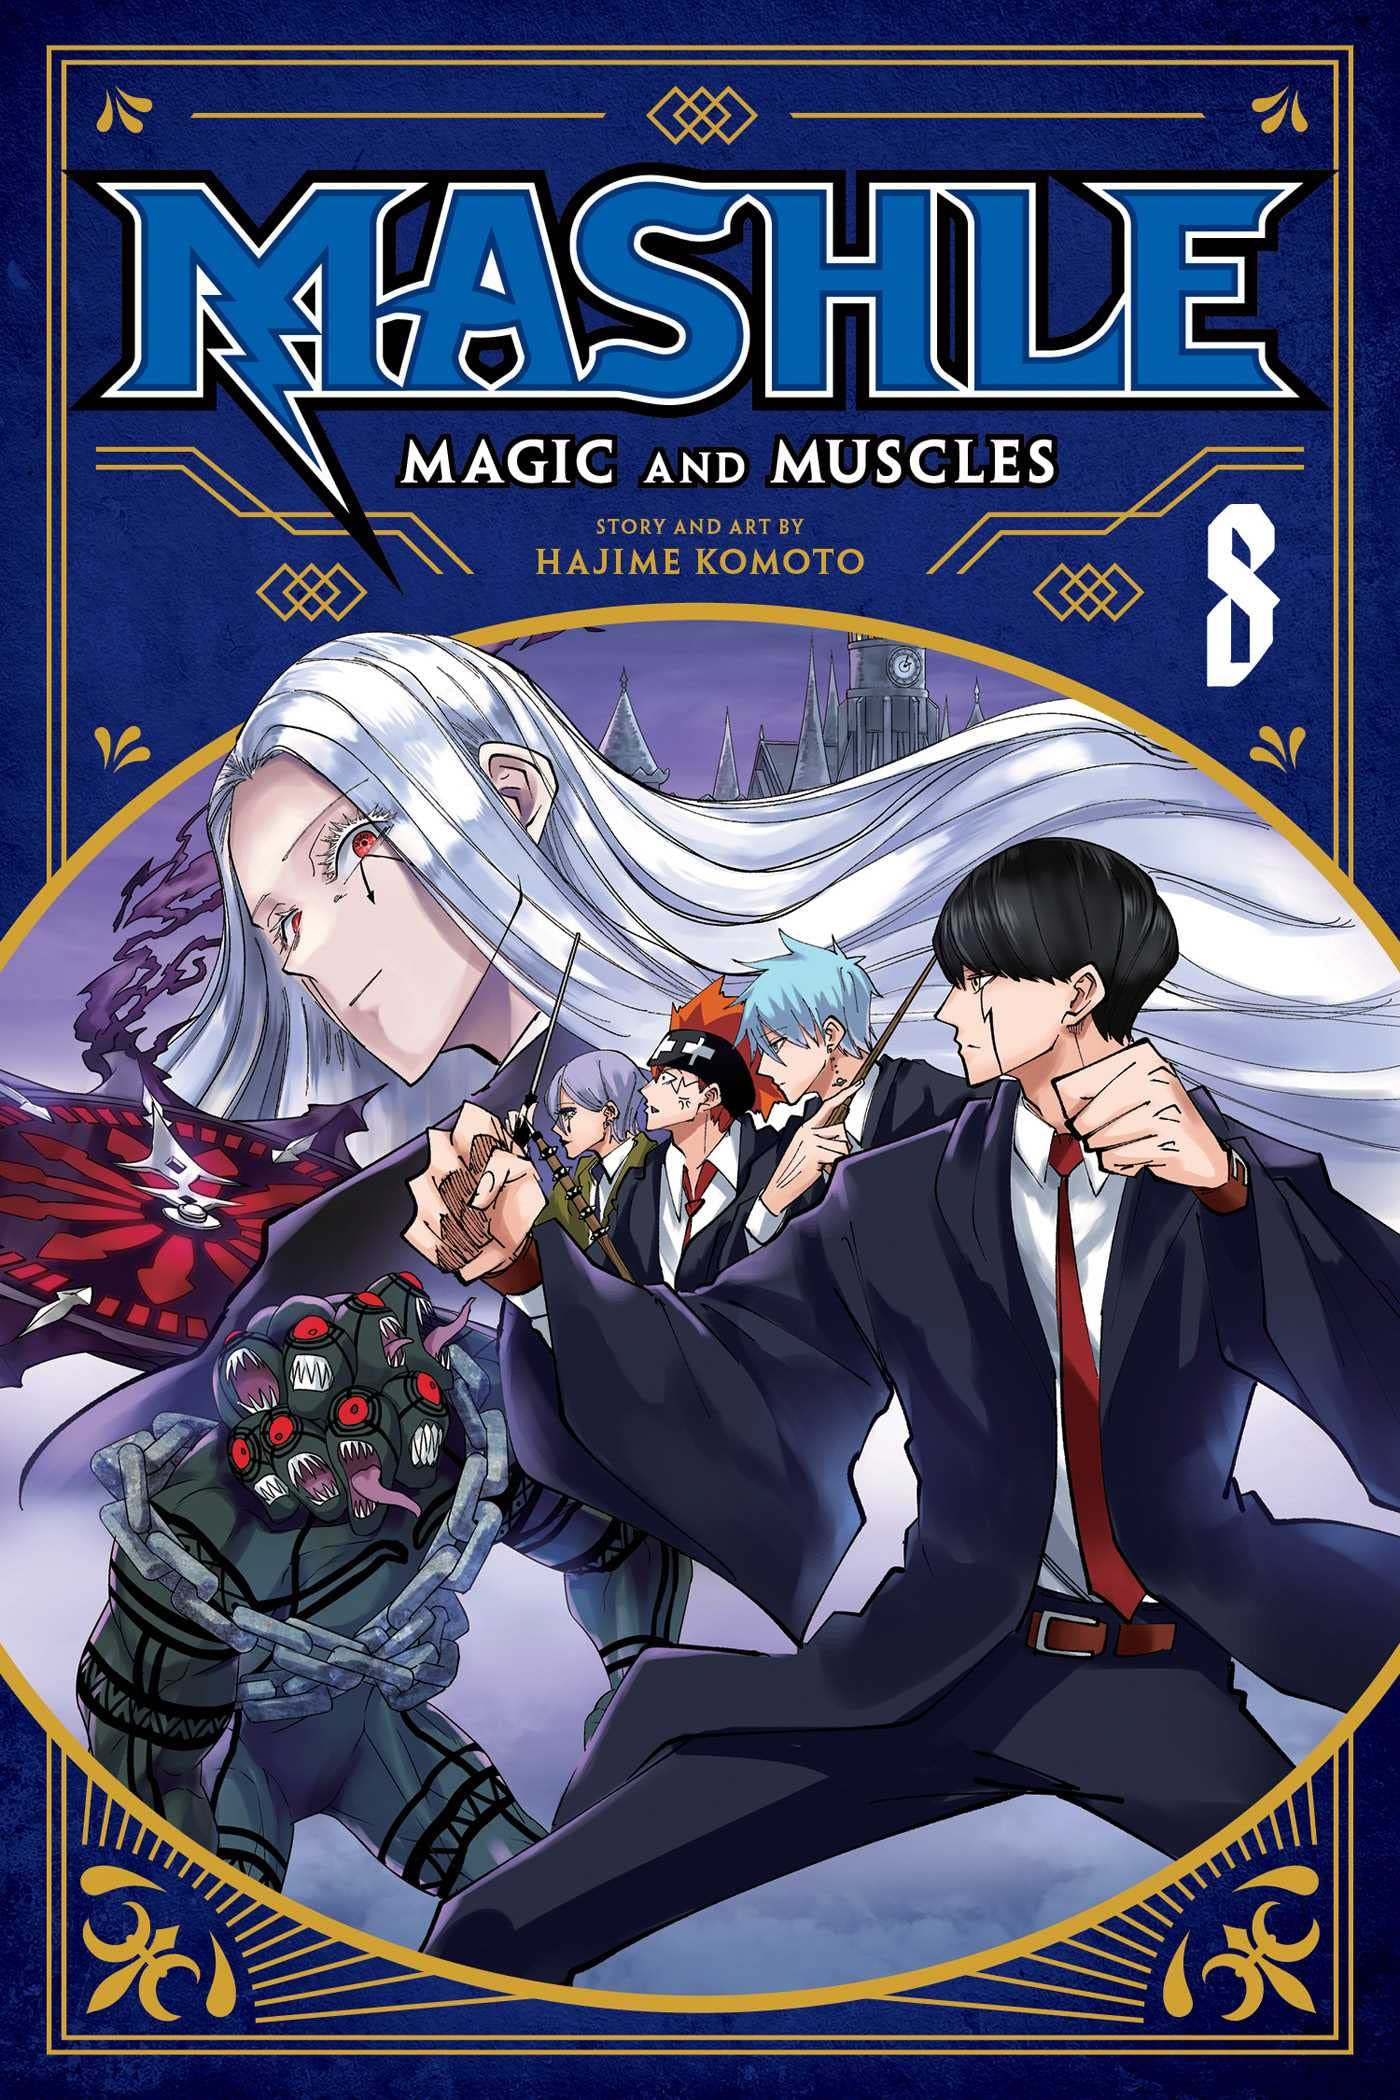 Mashle: Magic and Muscles chapter 158 - Release date and time